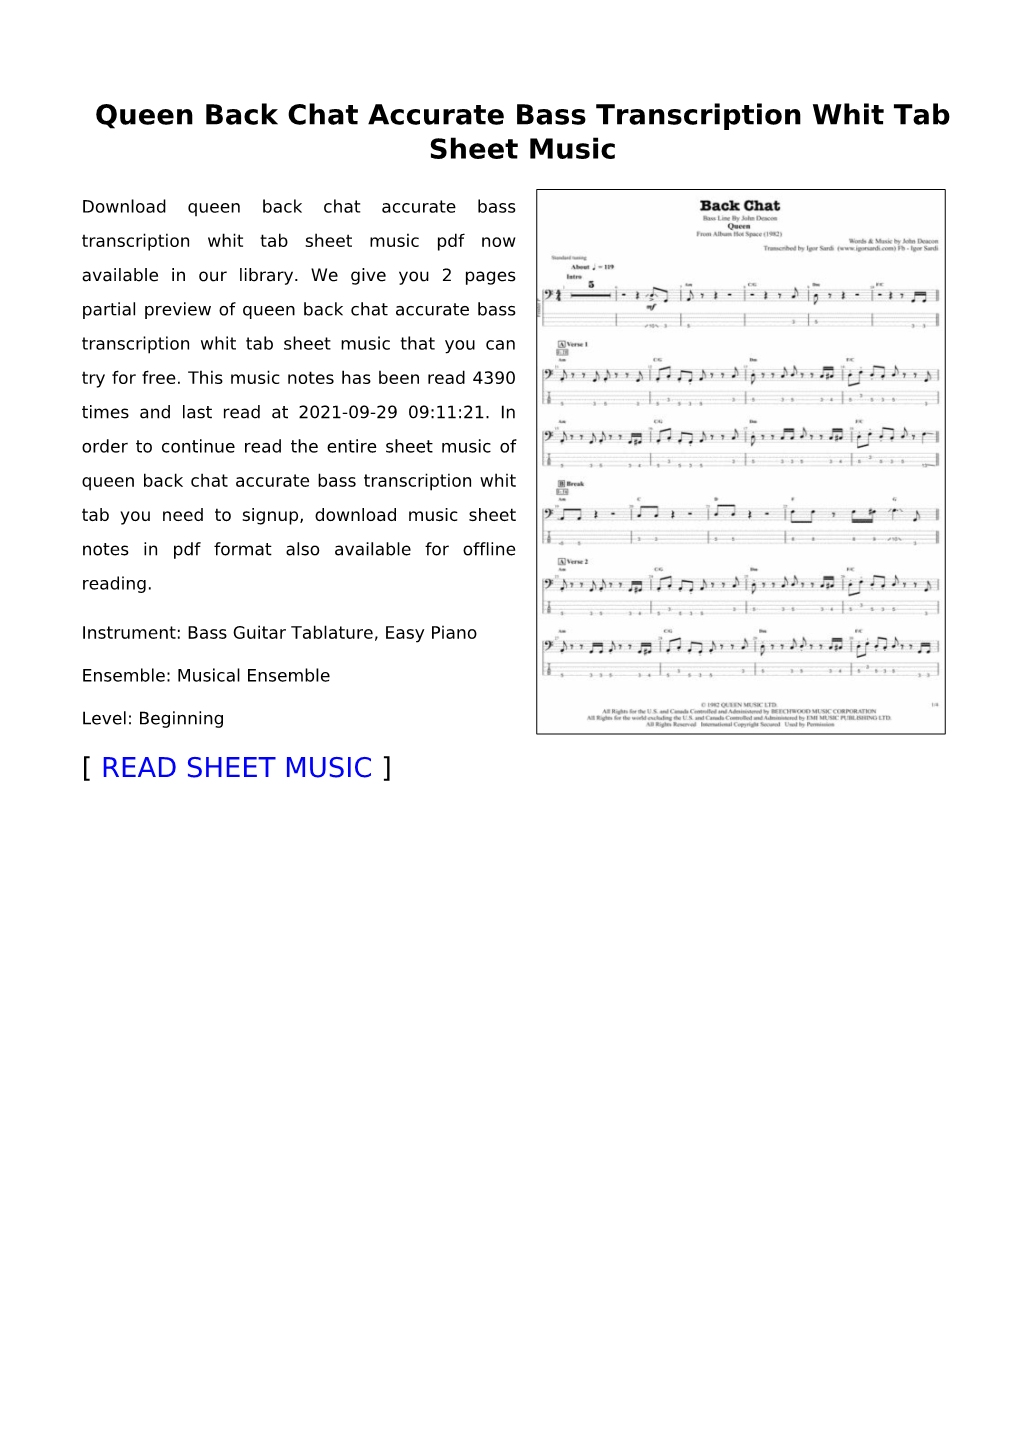 Queen Back Chat Accurate Bass Transcription Whit Tab Sheet Music